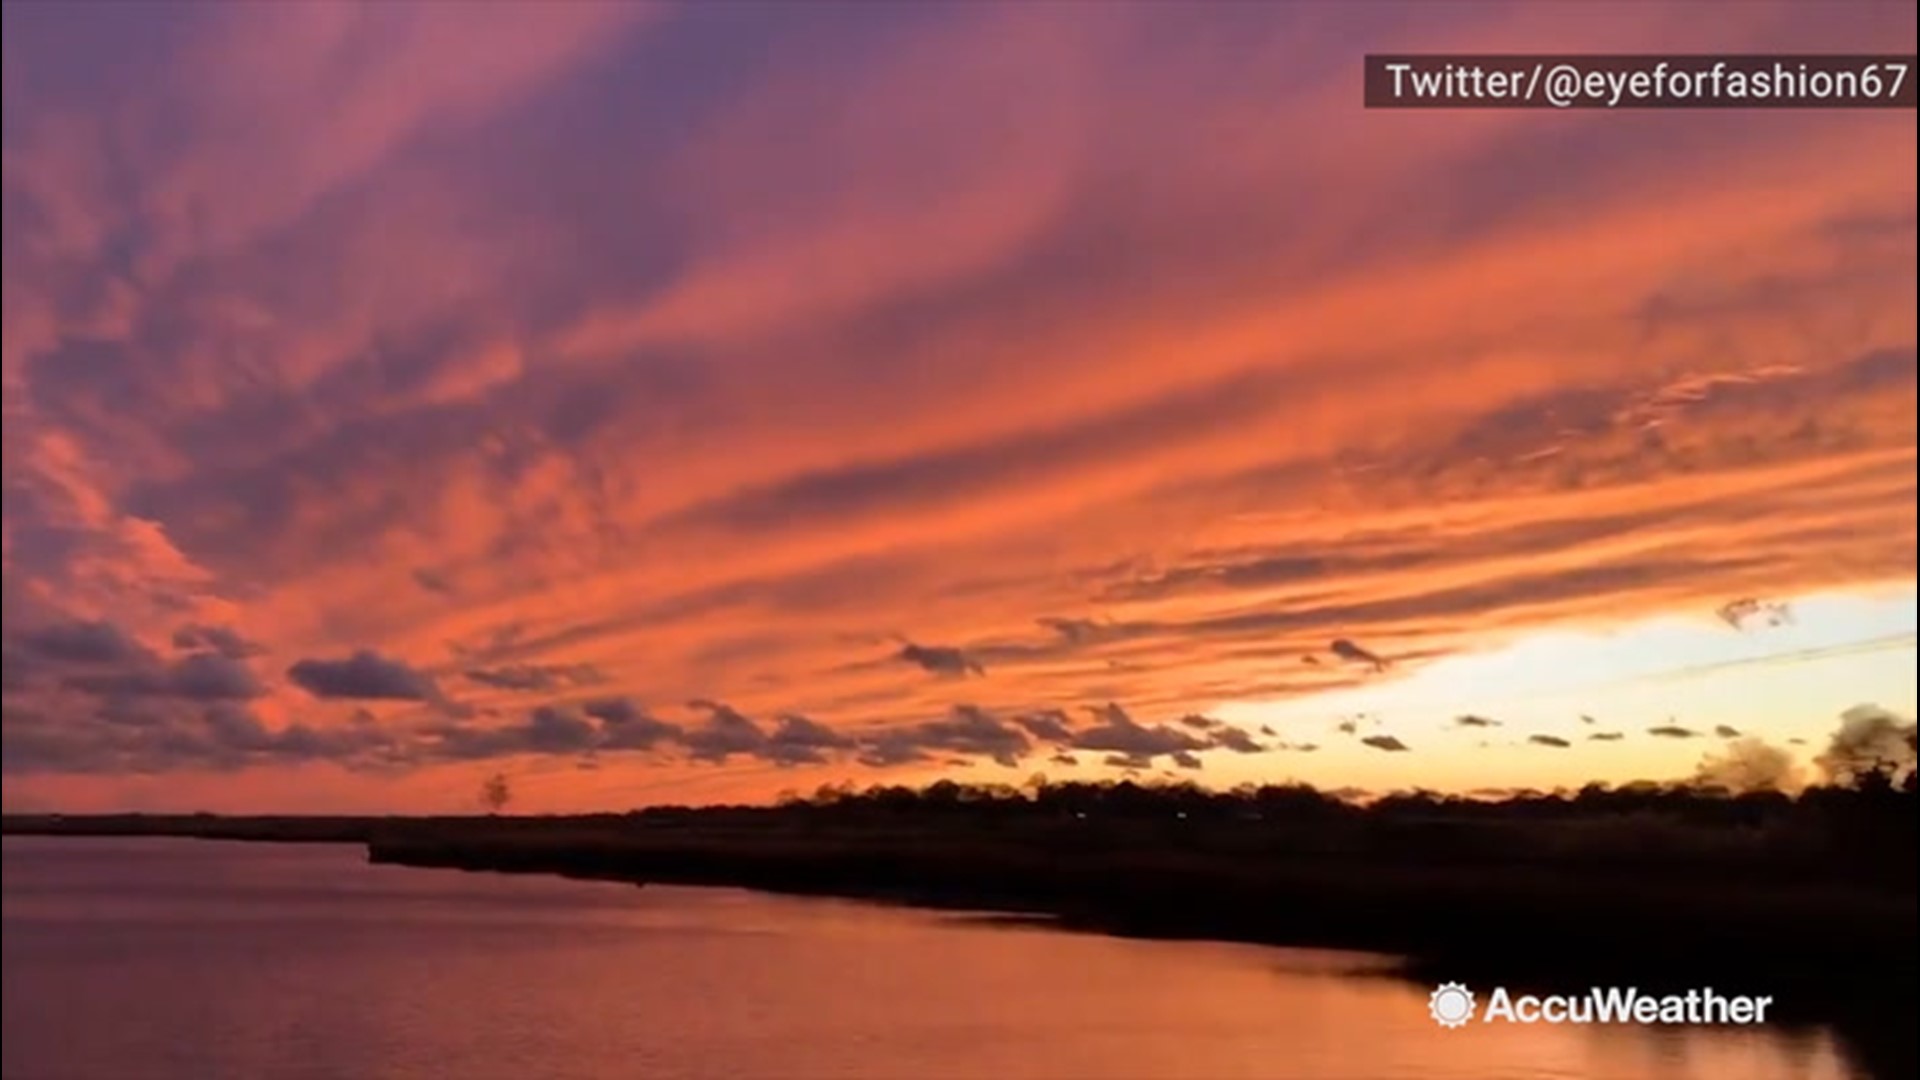 The sunset at Long Island, New York, was certainly enhanced by the spread of clouds in the sky on Nov. 12.